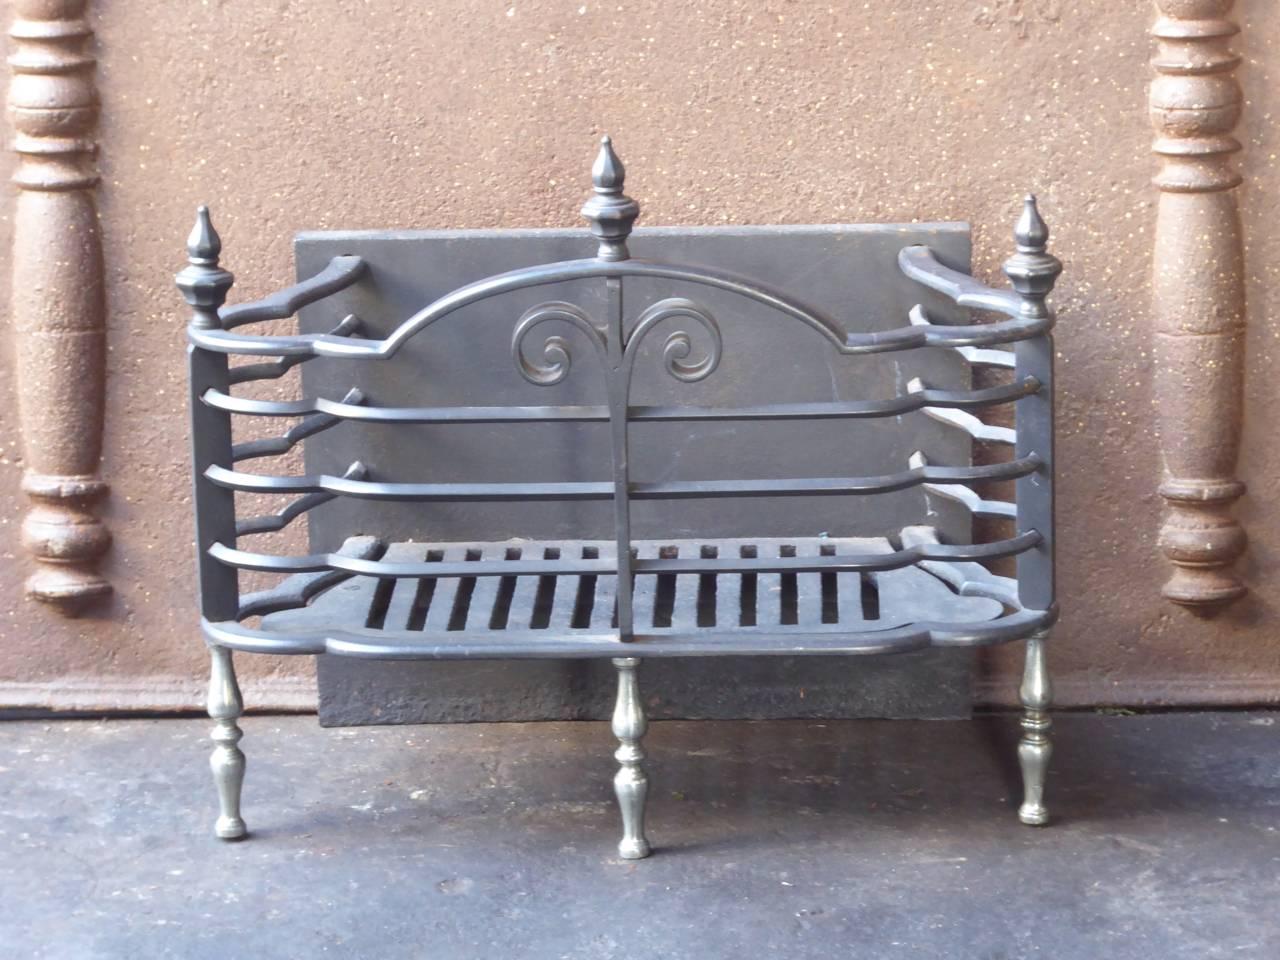 English Victorian fire grate made of cast iron, wrought iron and chrome. The total width of the front of the grate is 56 cm.

We have a unique and specialized collection of antique and used fireplace accessories consisting of more than 1000 listings